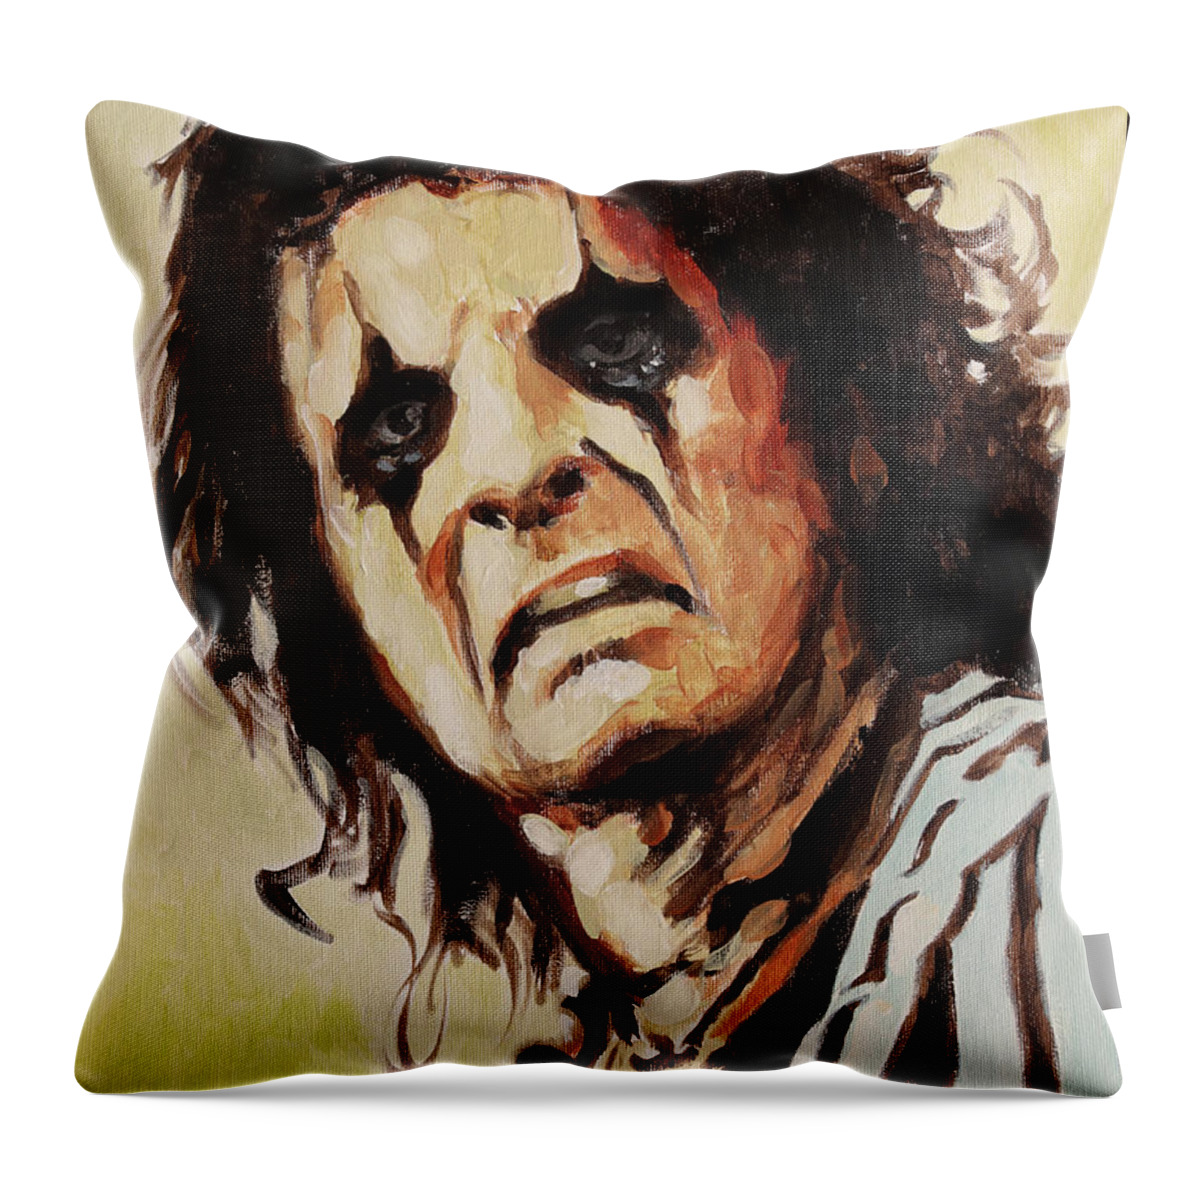 Alice Cooper Throw Pillow featuring the painting Alice Cooper by Sv Bell